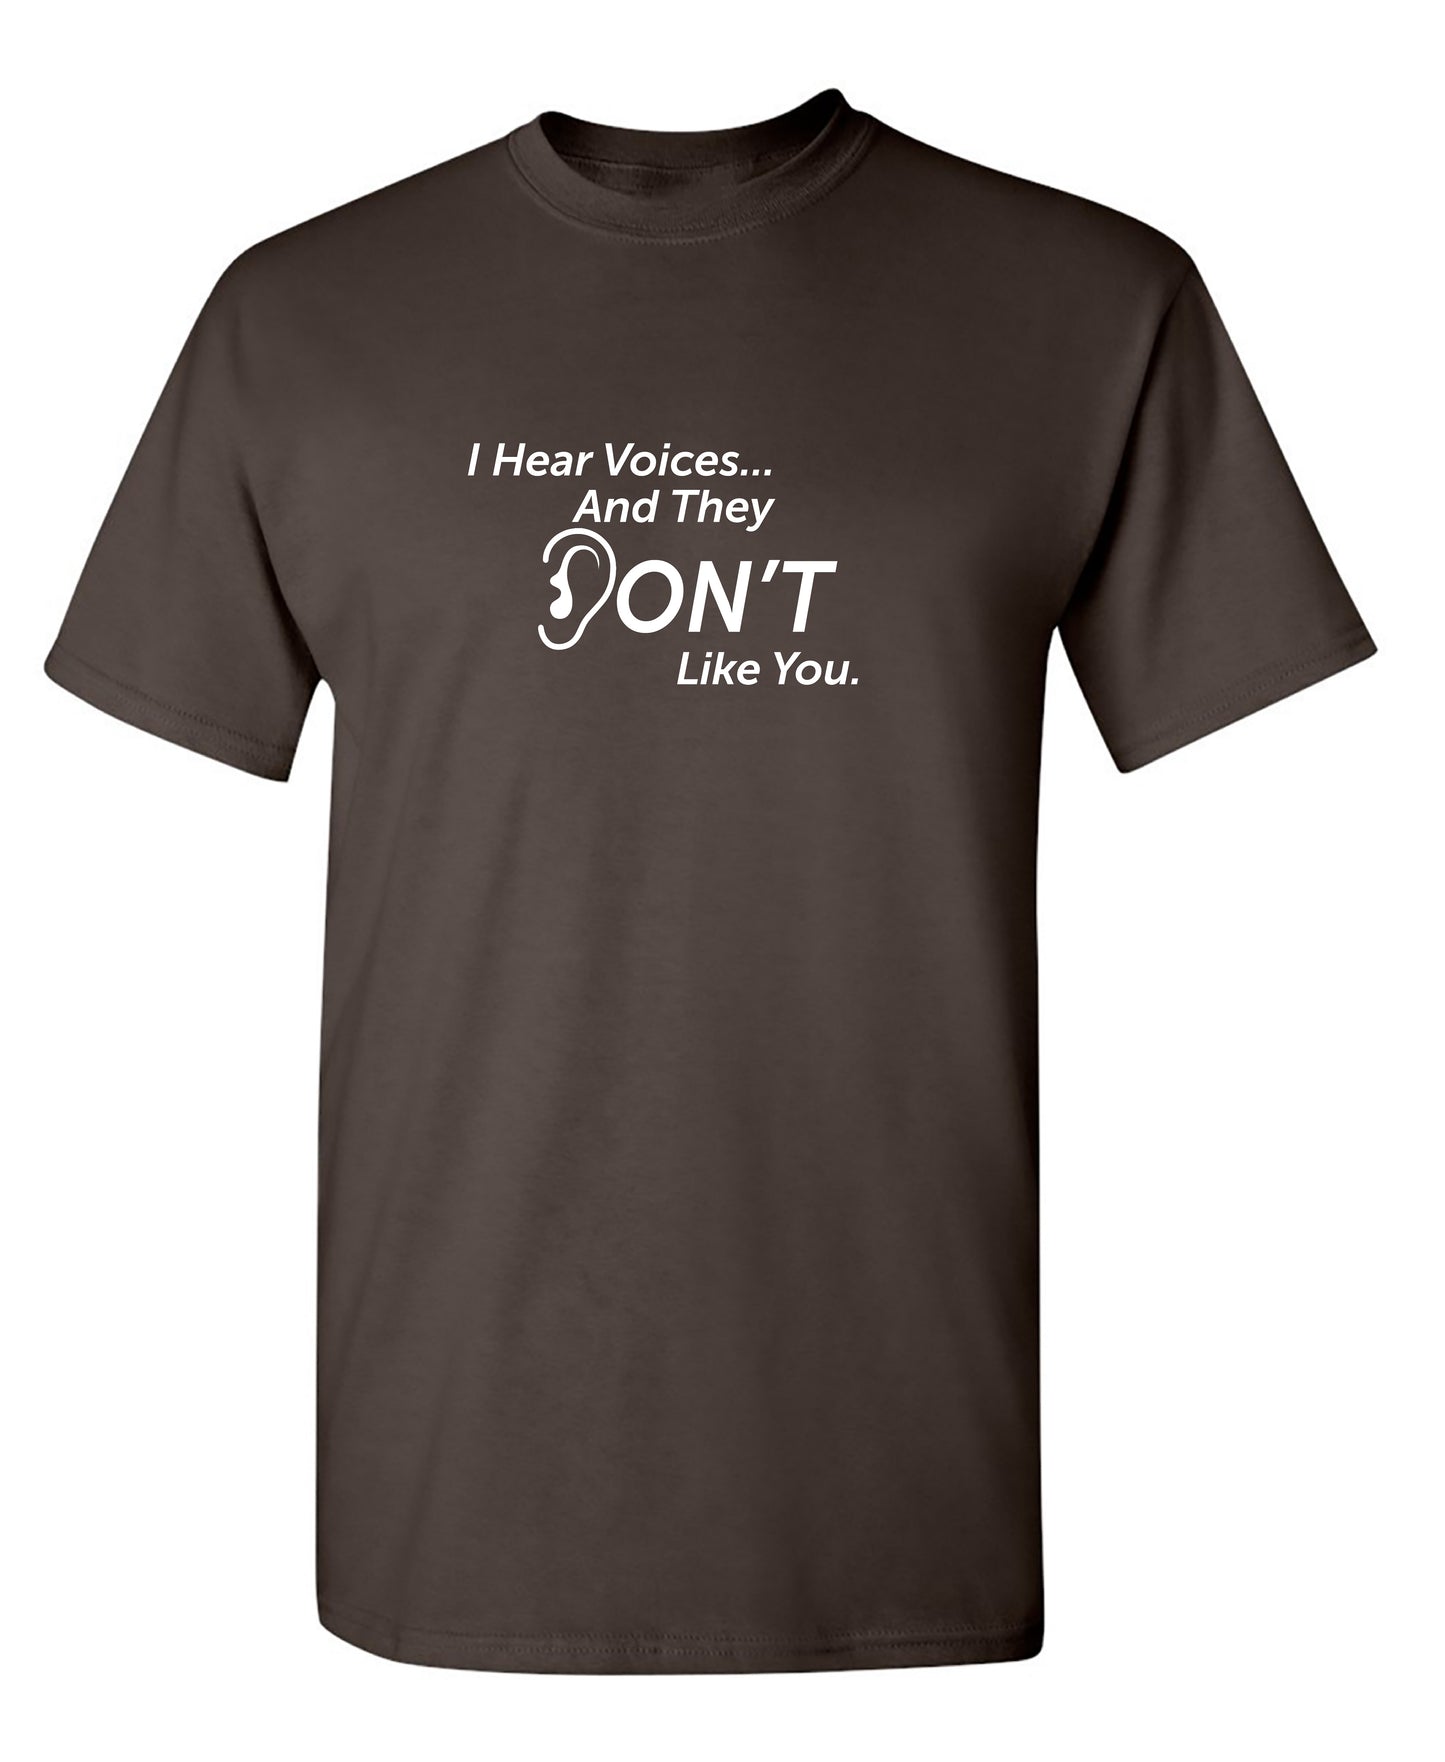 I Hear Voices… And They Don't Like You. New - Funny T Shirts & Graphic Tees